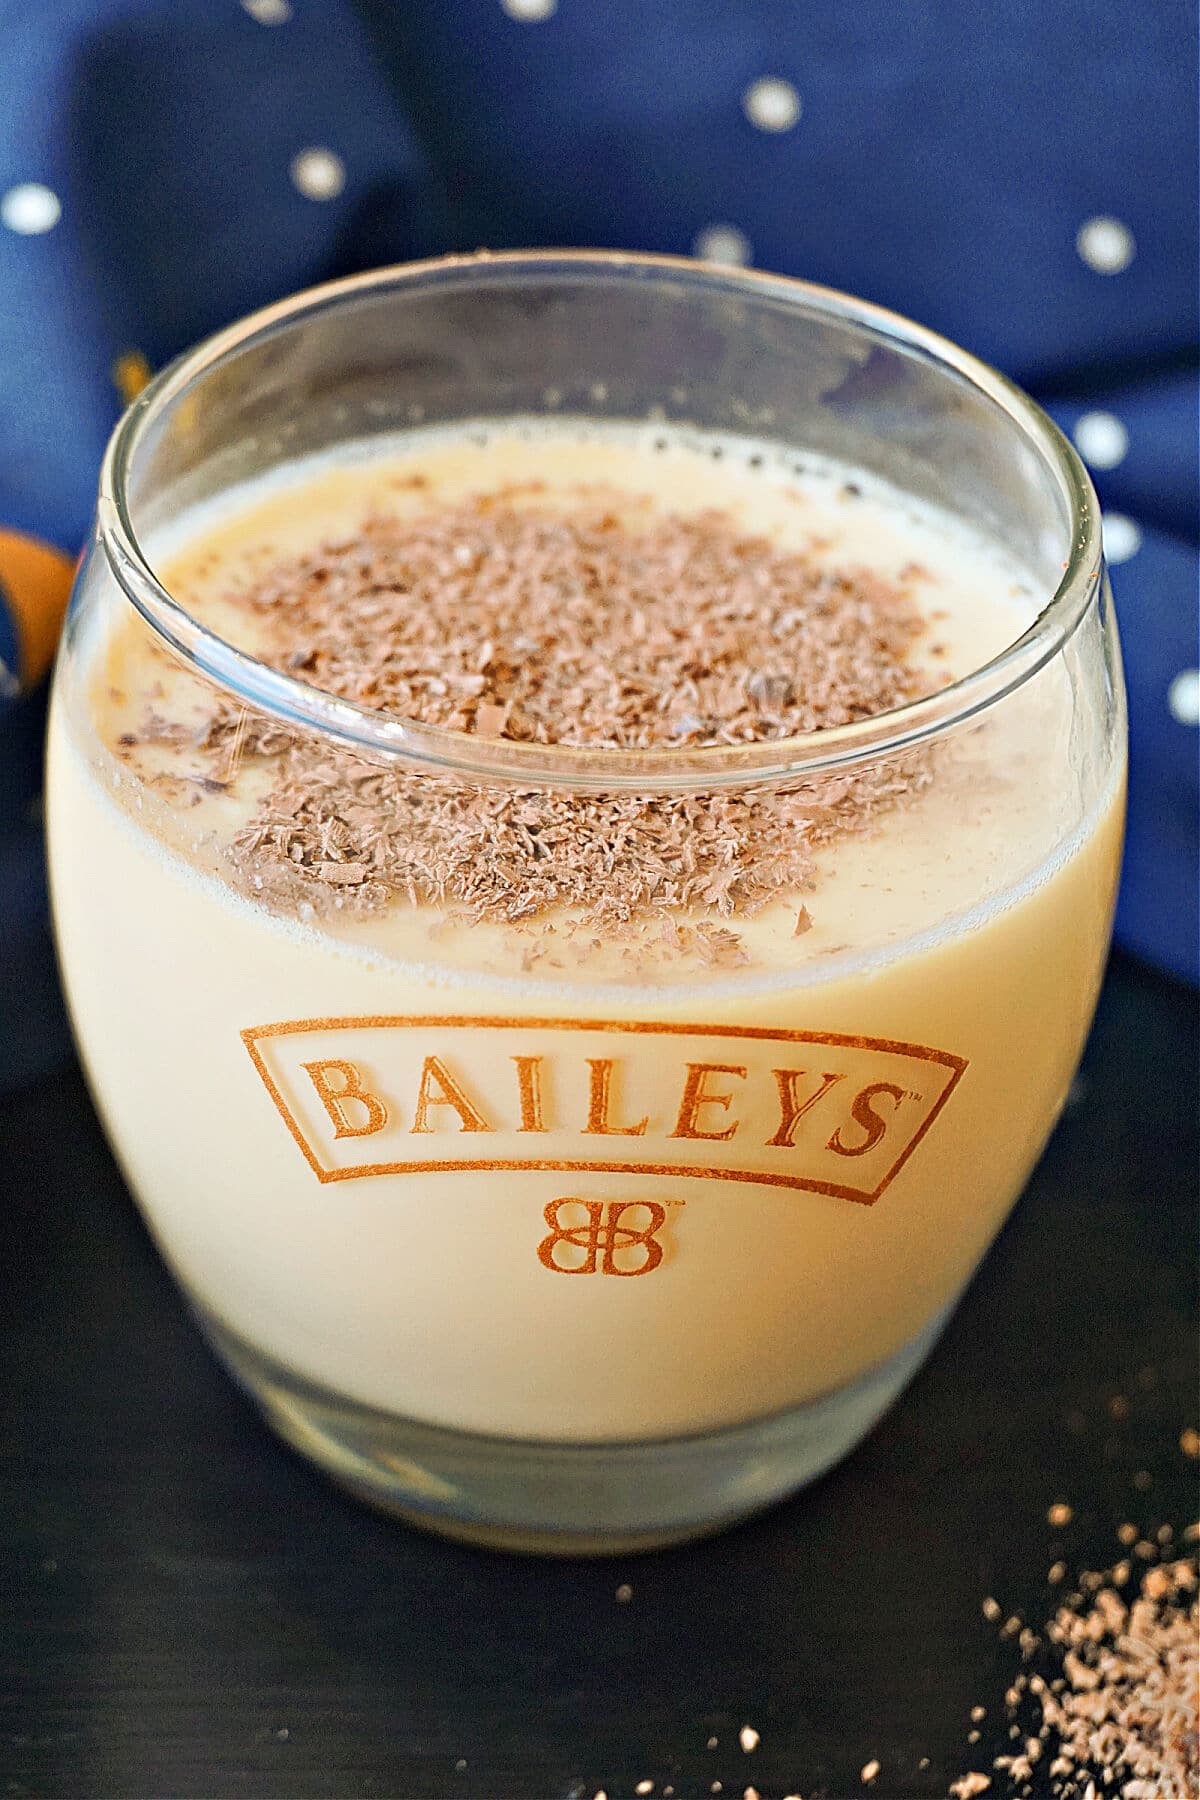 A glass of baileys panna cotta garnished with grated chocolate.